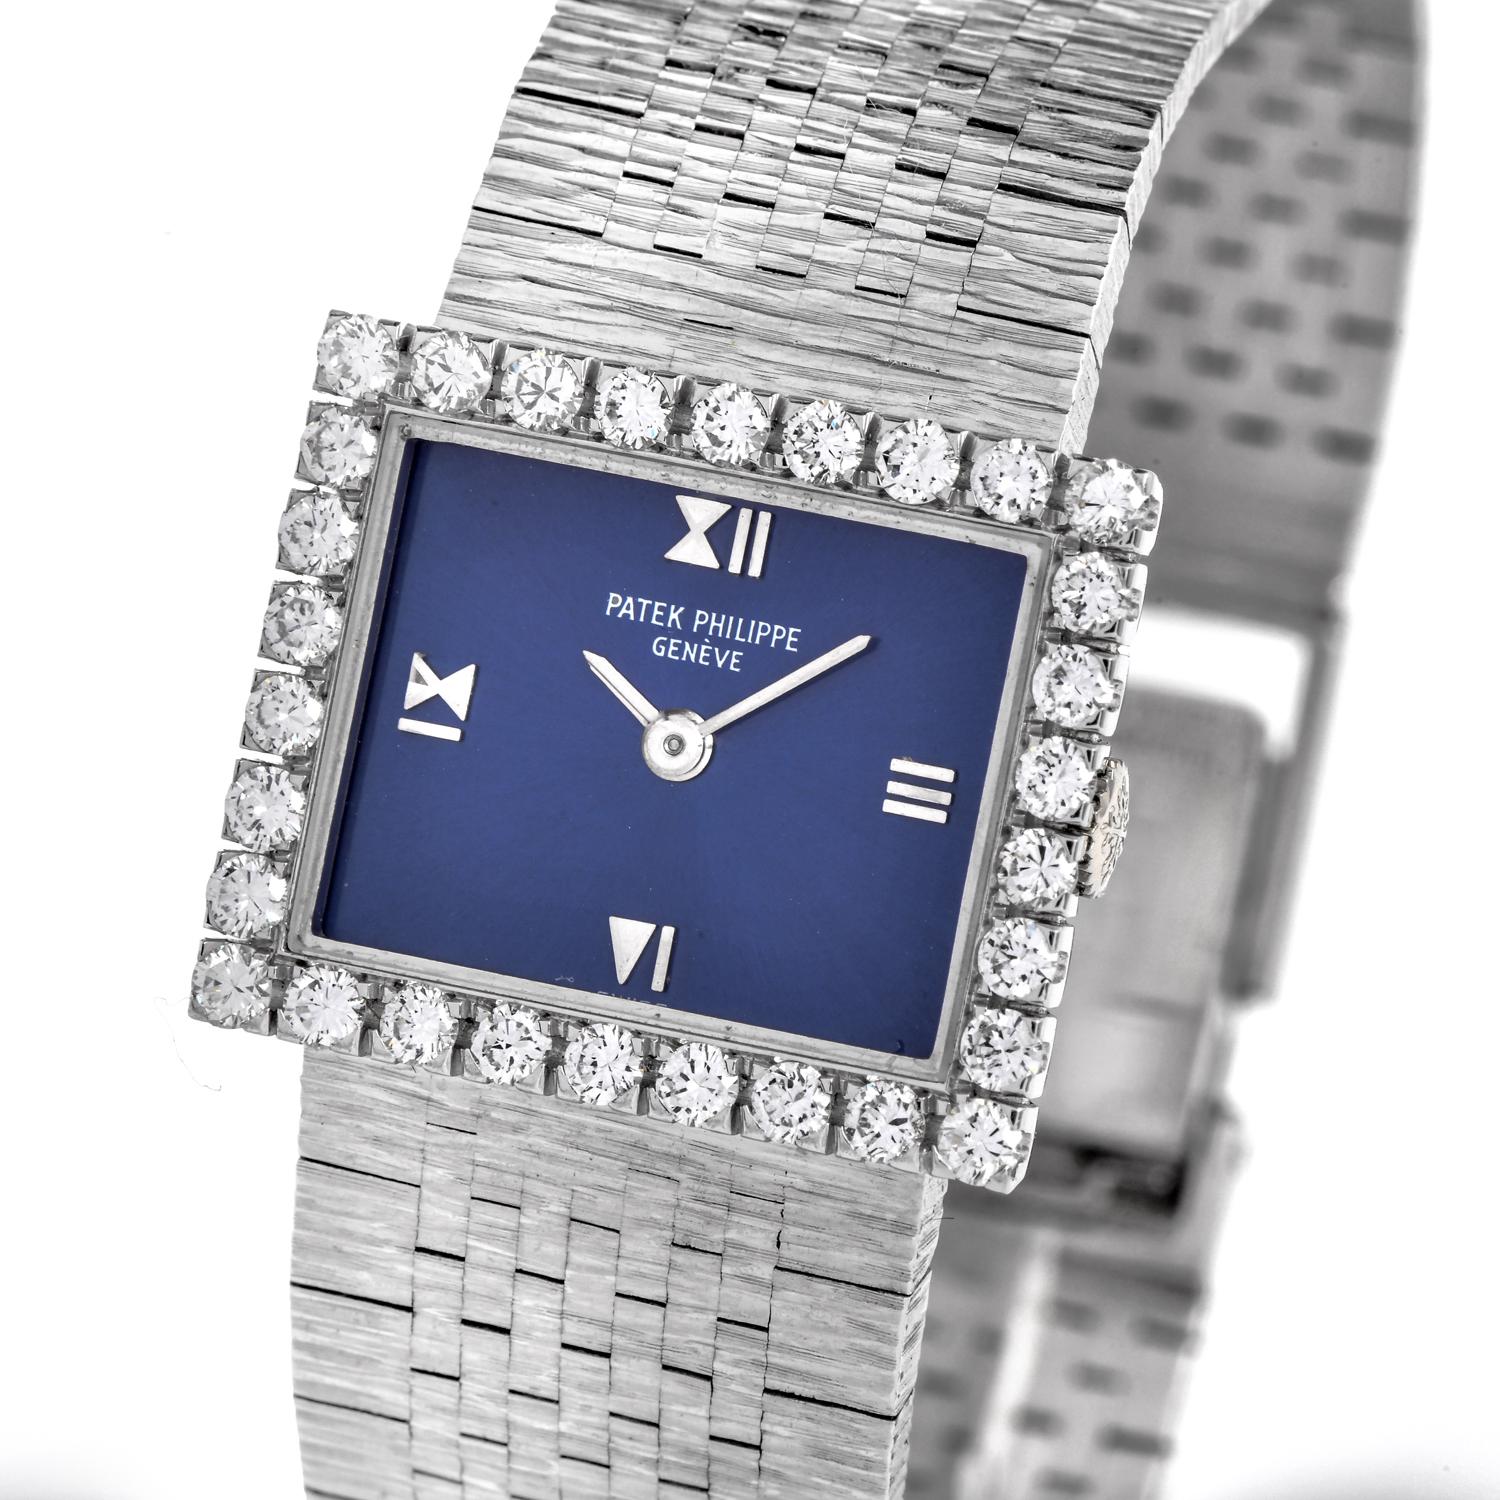 This elegant Vintage 1960s all-original Patek Philippe ladies' watch is crafted in 18k white gold. The rectangular case with original mechanical movement presents an attractive royal blue dial embraced by 30 Factory set round brilliant cut diamonds